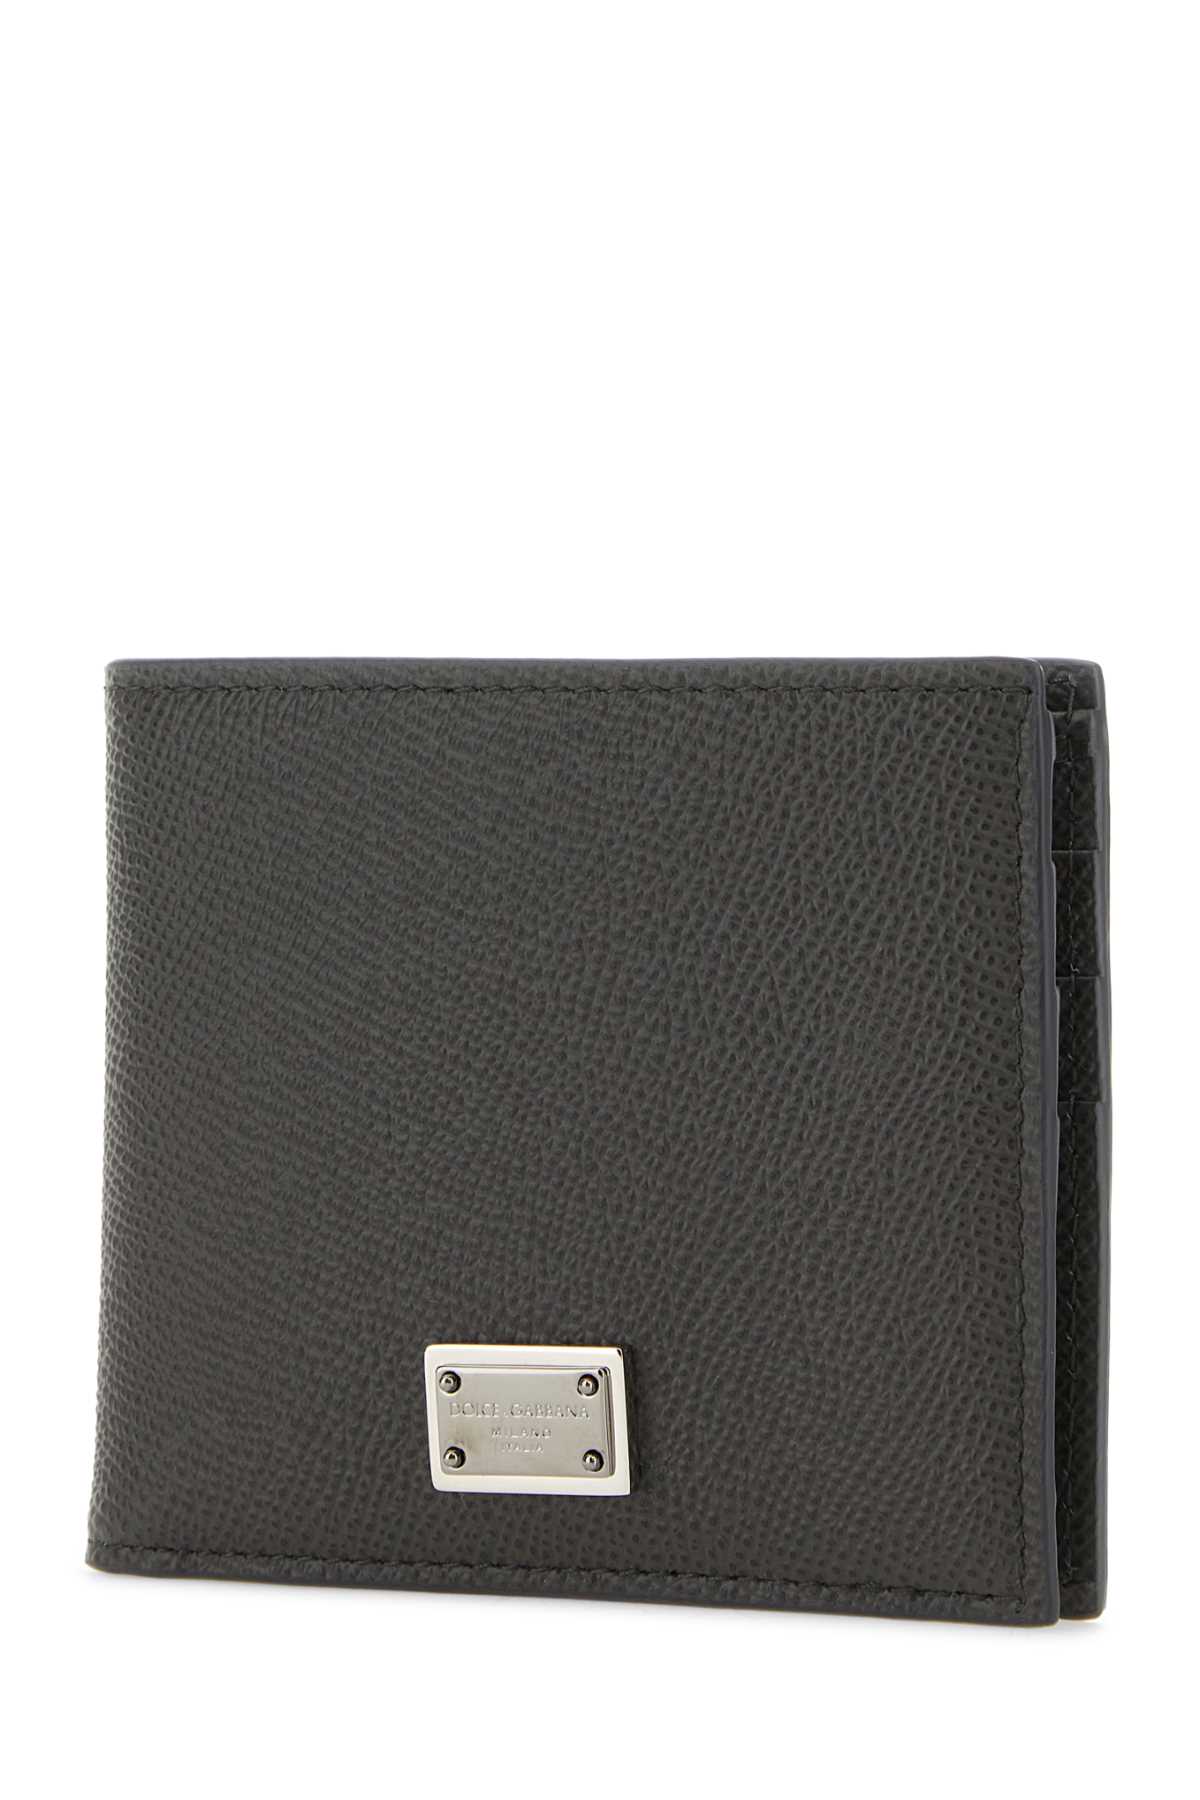 Dolce & Gabbana Dove Grey Leather Wallet In 8h708